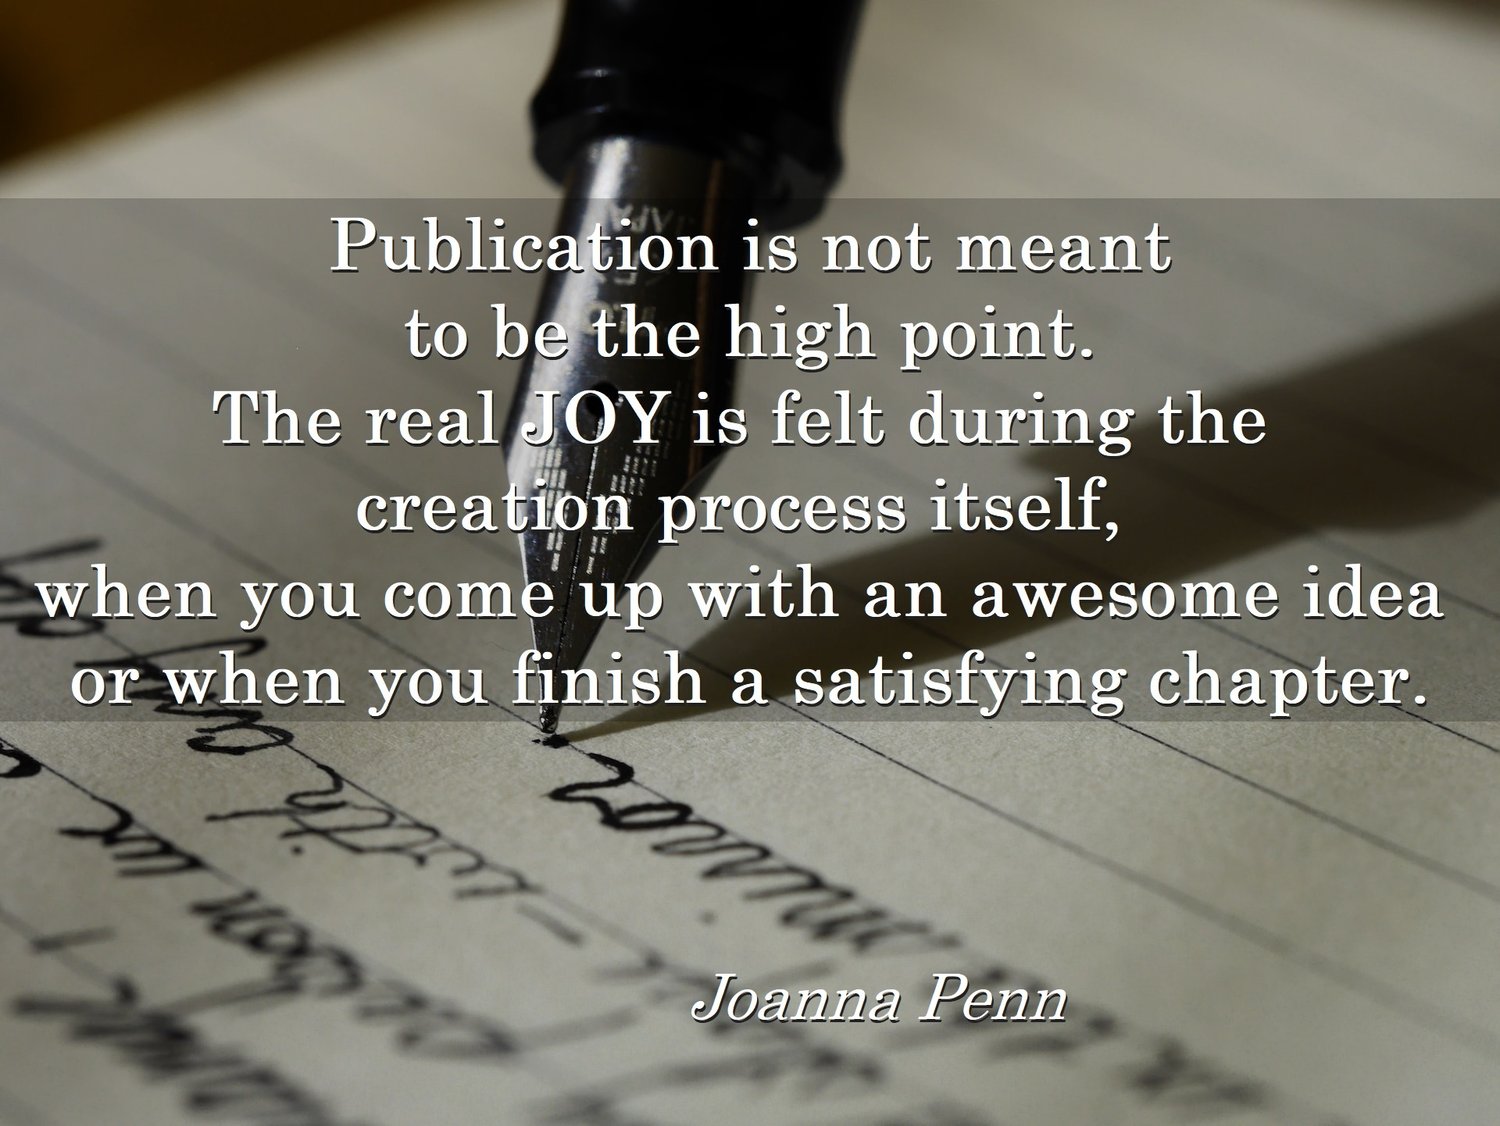 Publication is not meant to be the high point. The real JOY is felt during the creation process itself, when you come up with an awesome idea or when you finish a satisfying chapter. A quote from Joanna Penn